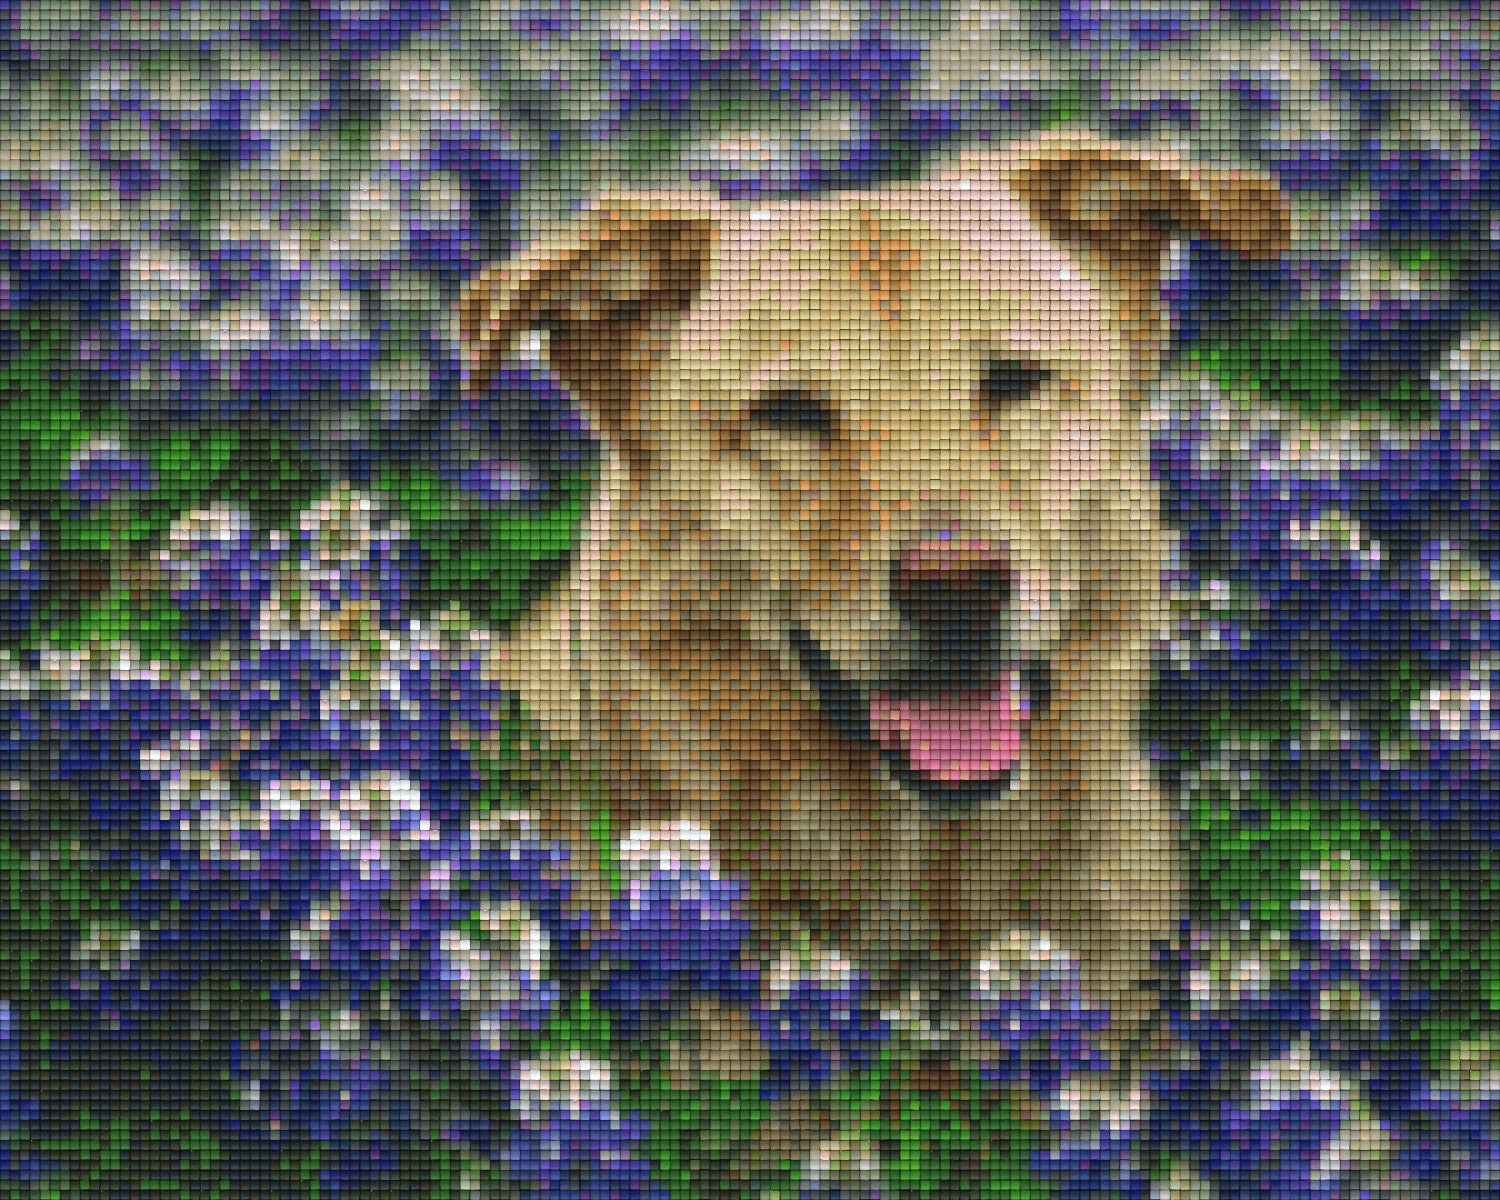 Pixelhobby classic set - dog in the meadow